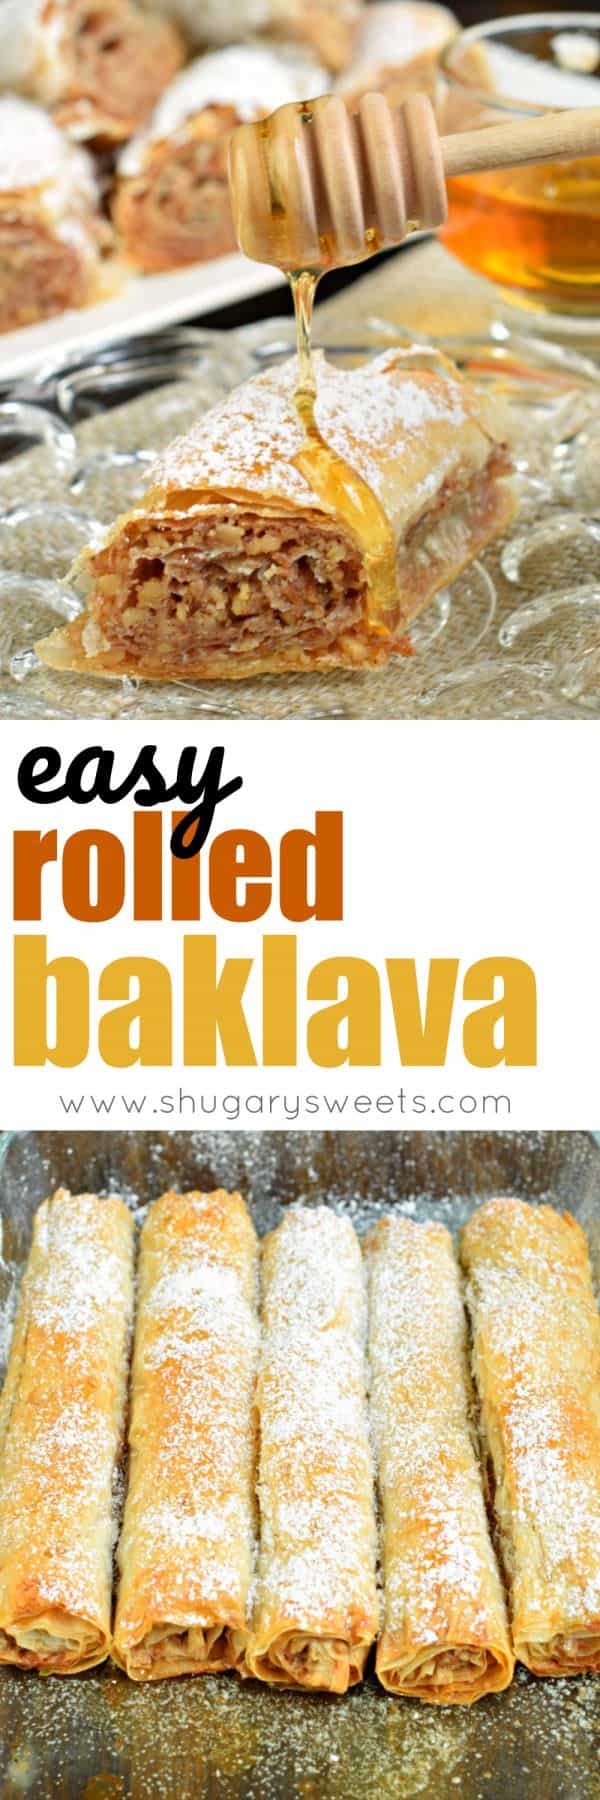 Sweet and flaky, this easy, rolled Russian Baklava will melt in your mouth! Phyllo dough, nuts, and sugar never tasted so good!